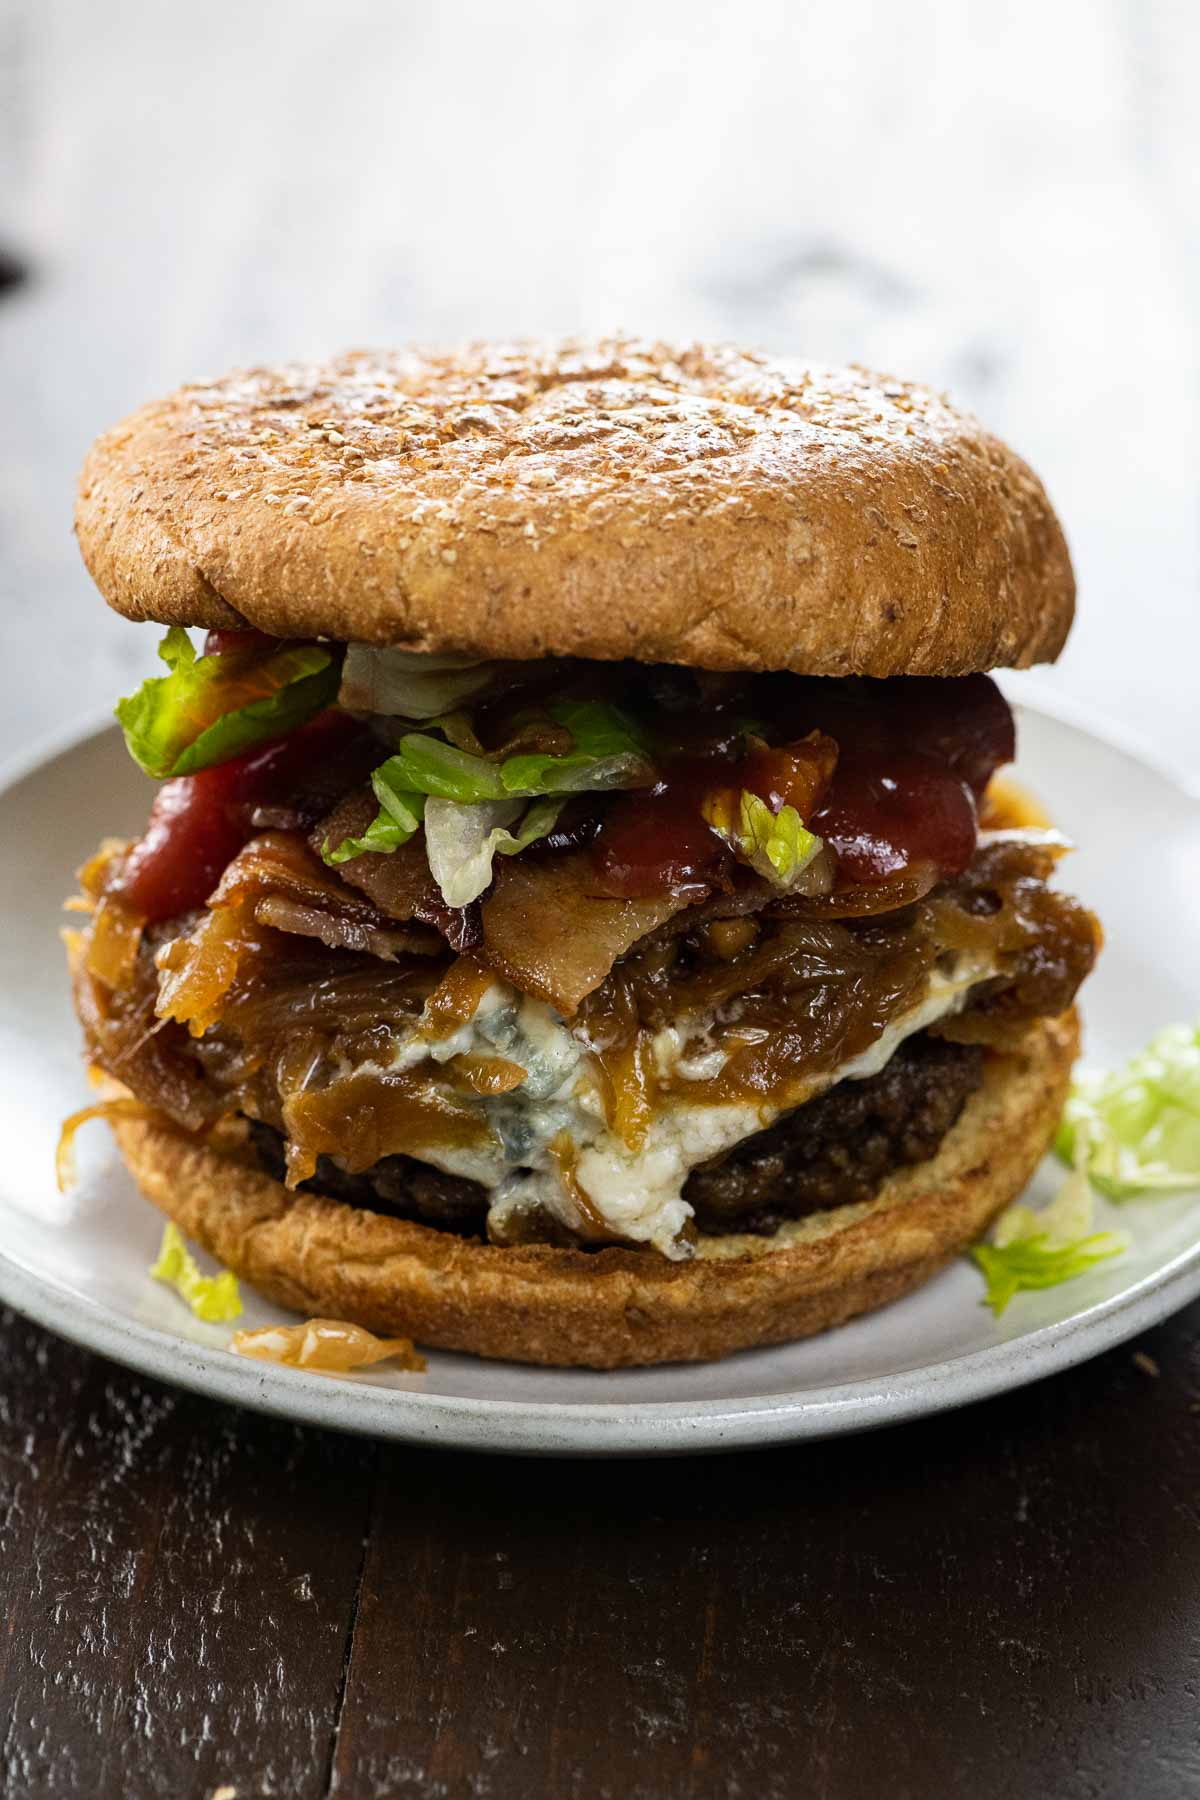 bacon weave blue cheese burger with caramelized onions, lettuce, and ketchup on a small plate